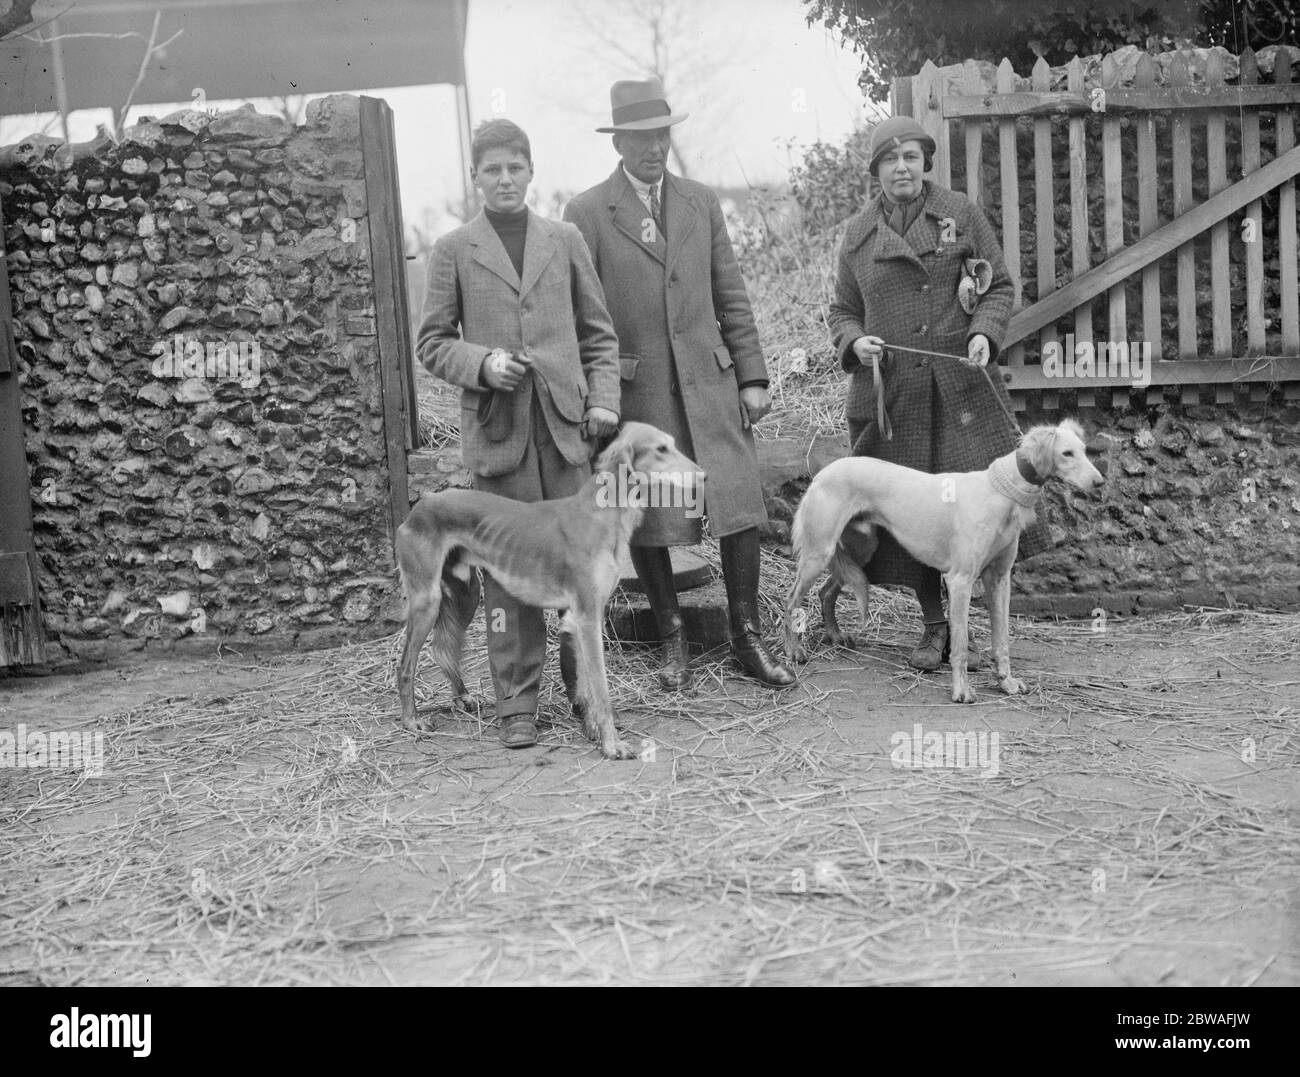 The Cleve Saluki Coursing Club 's National Cup meeting on Captain Friend 's estate at Northdown , Margate . Jim Sowrey with  Nal Kawi  ( runner up ) , Captain J Sowrey ( Judge ) and Miss Doris Trettell with Commander Adam 's  Haredam Viking  ( winner ) . 15 January 1935 Stock Photo